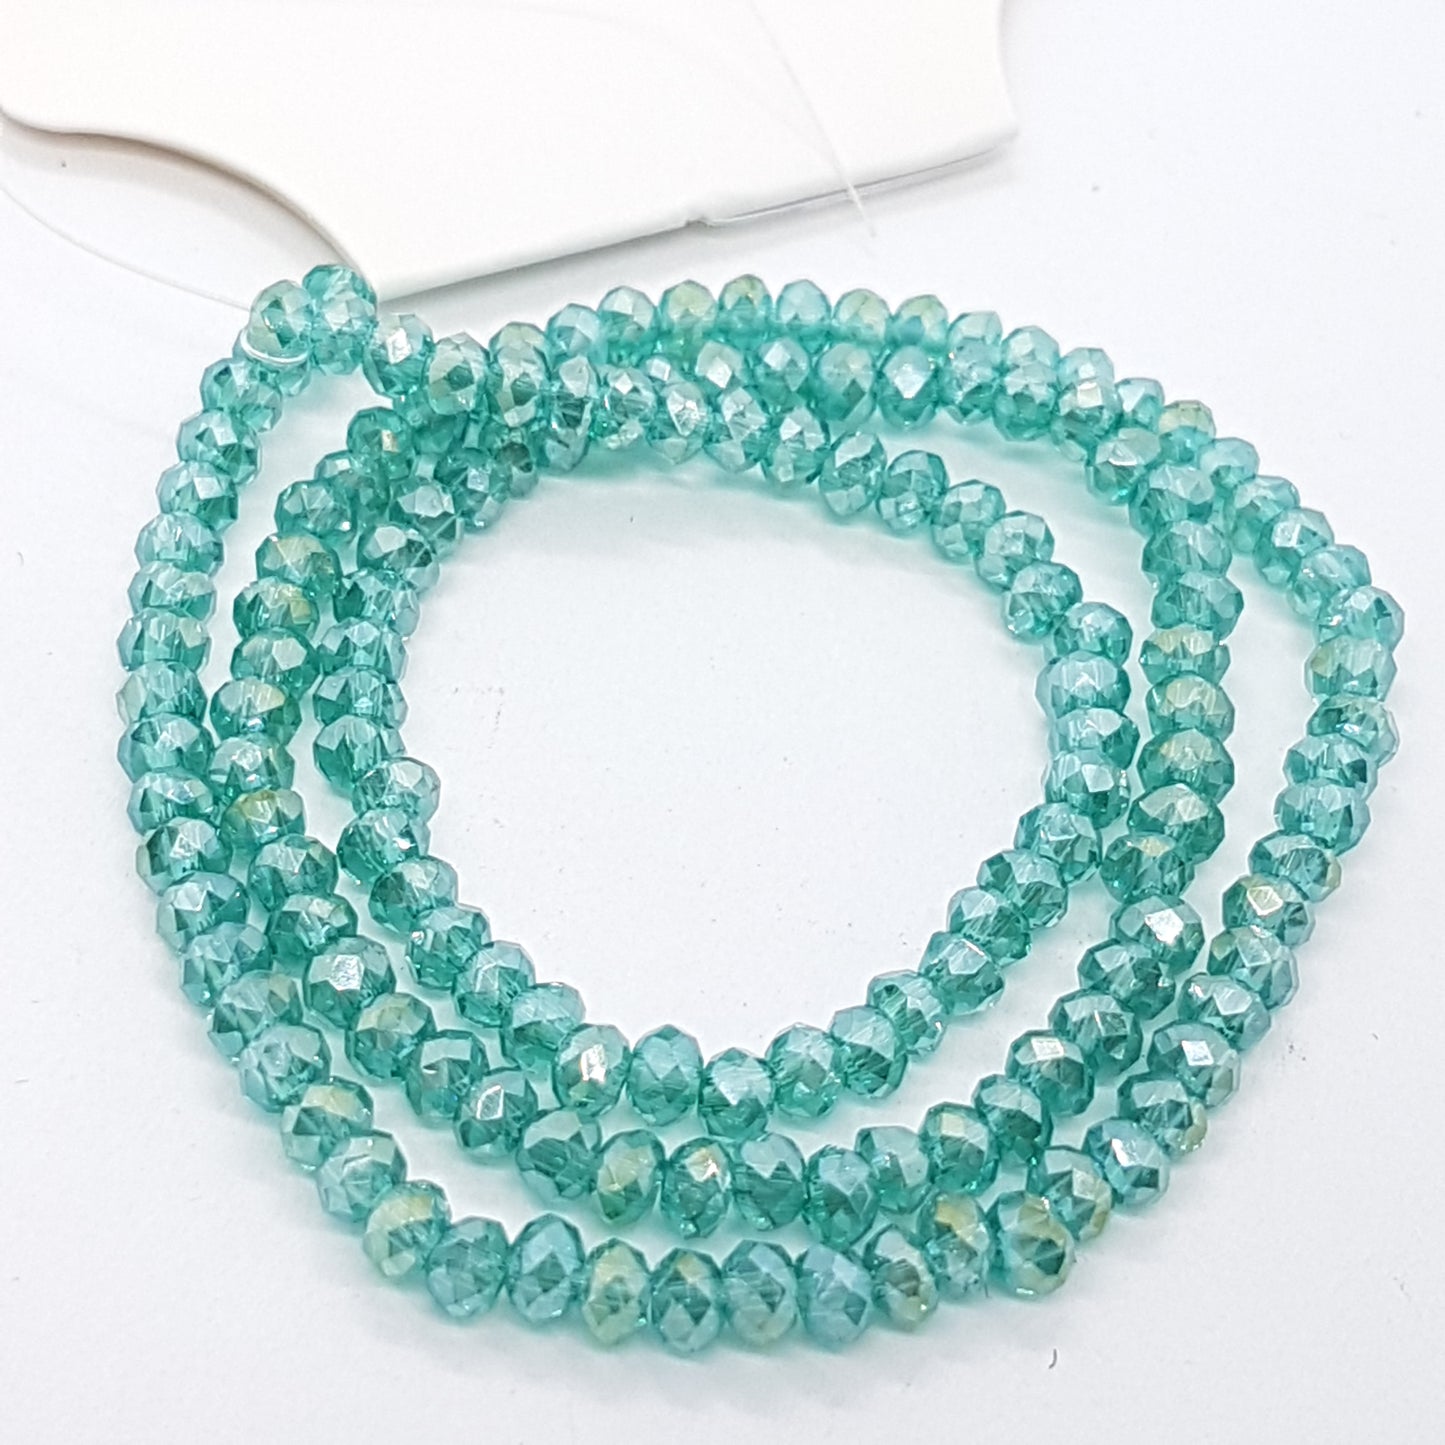 150pc Teal Crystal Rondelle Beads